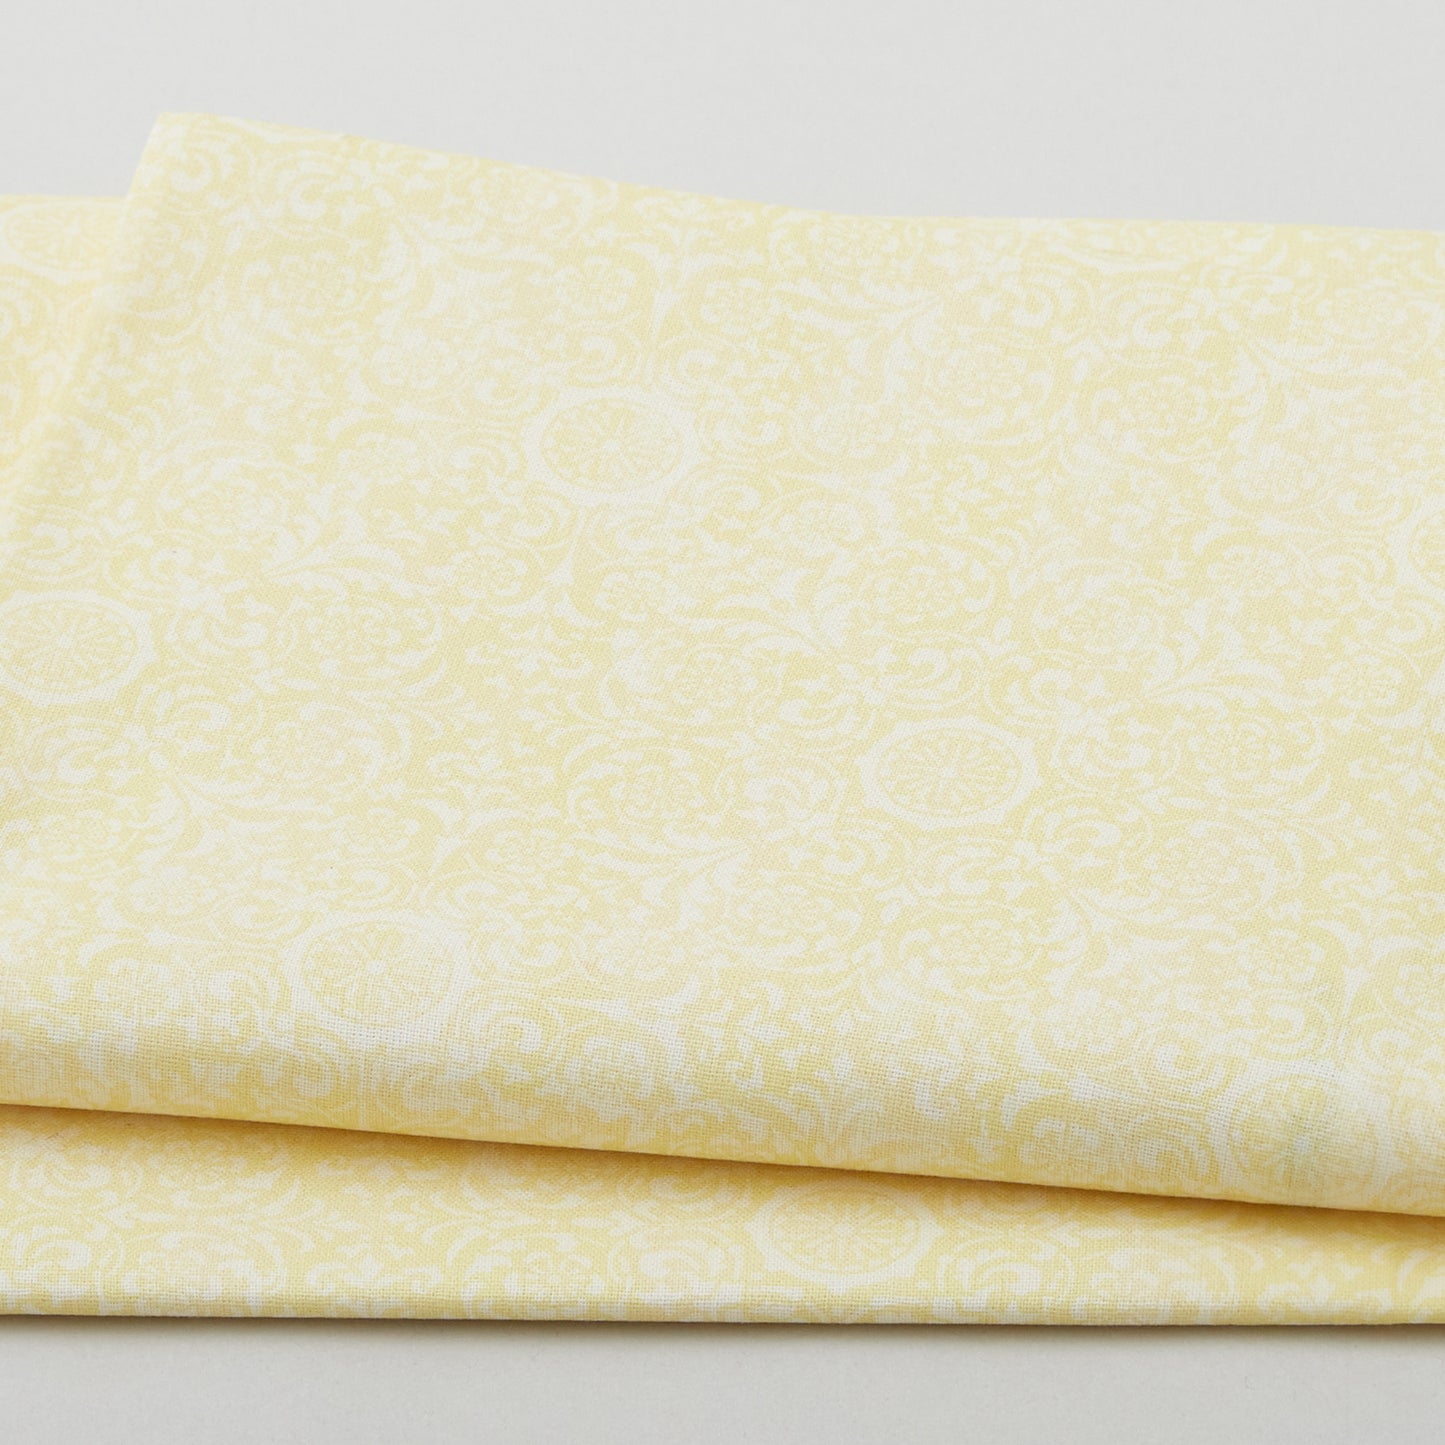 Tiled Perfection Blender - Yellow 2 Yard Cut Primary Image